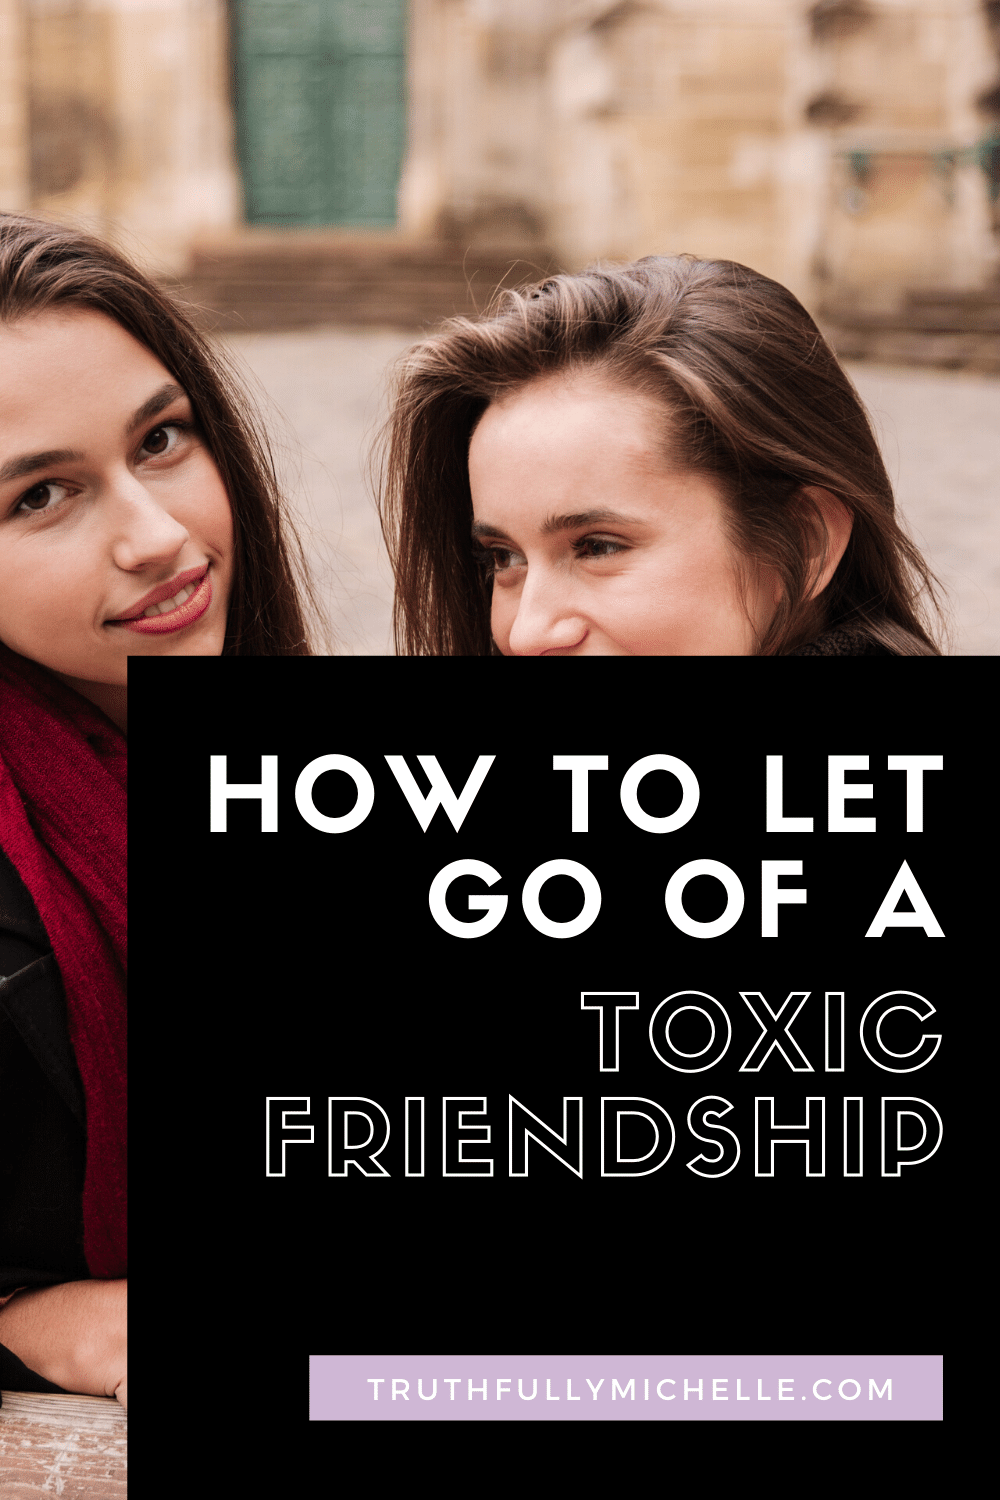 when to let go of a friendship, when it's time to let go of a friendship, signs its time to let go of a friendship, how to know when to let go of a friendship, how to let go of a toxic friendship